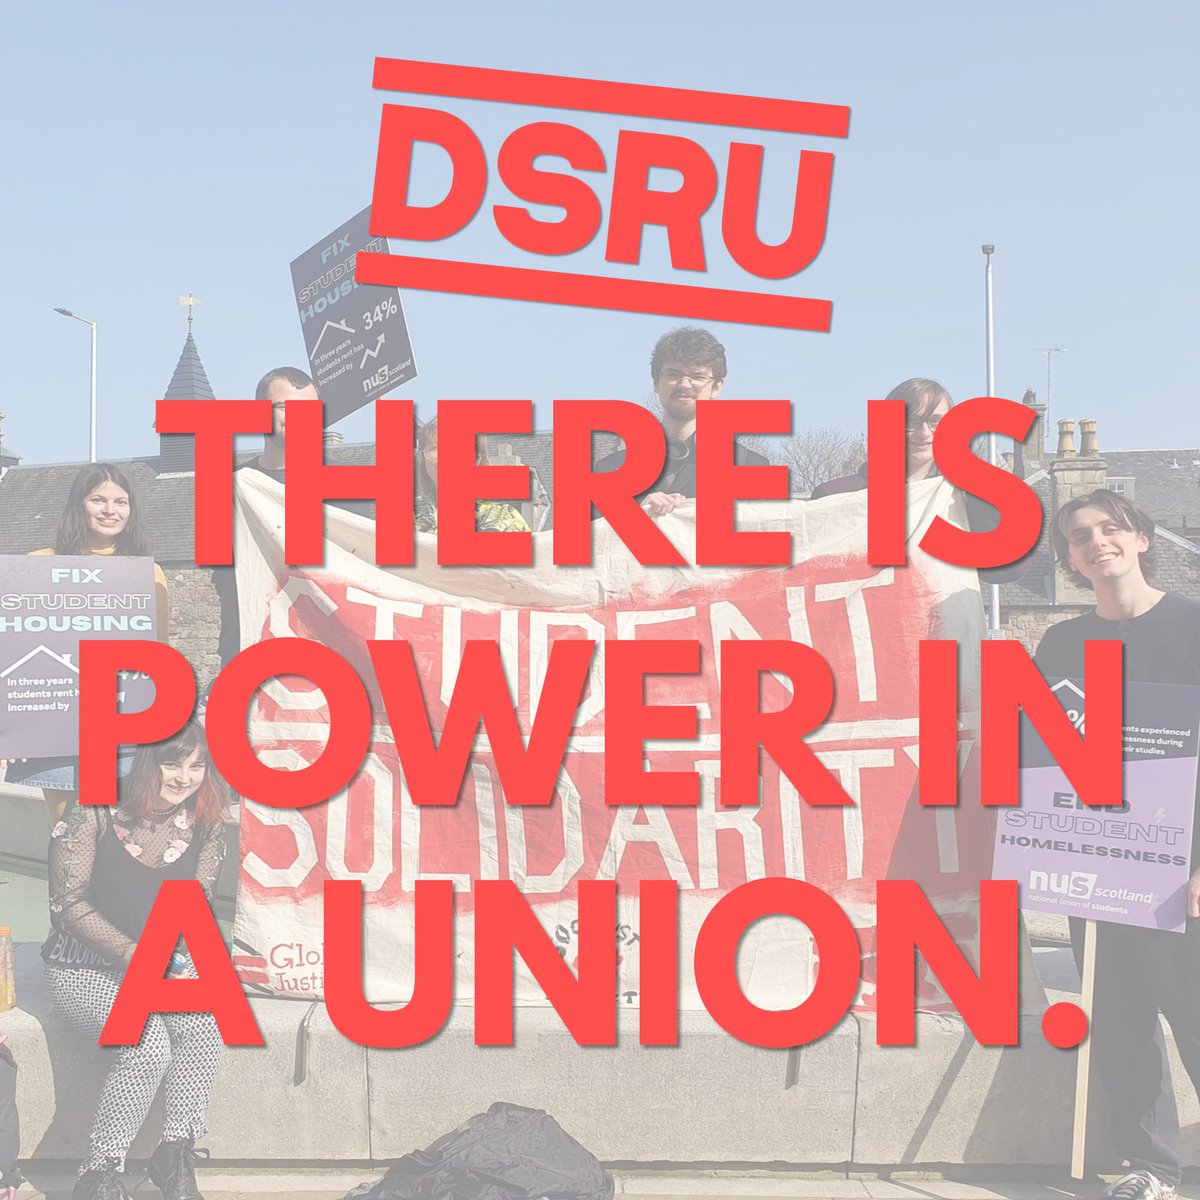 Yesterday we submitted our consultation on the Scottish Government's 'Housing to 2040' Plan. Our campaign work comes from our casework, our members decide our agenda. There is power in a union. #SolidarityWorks #RentsDownRightsUp